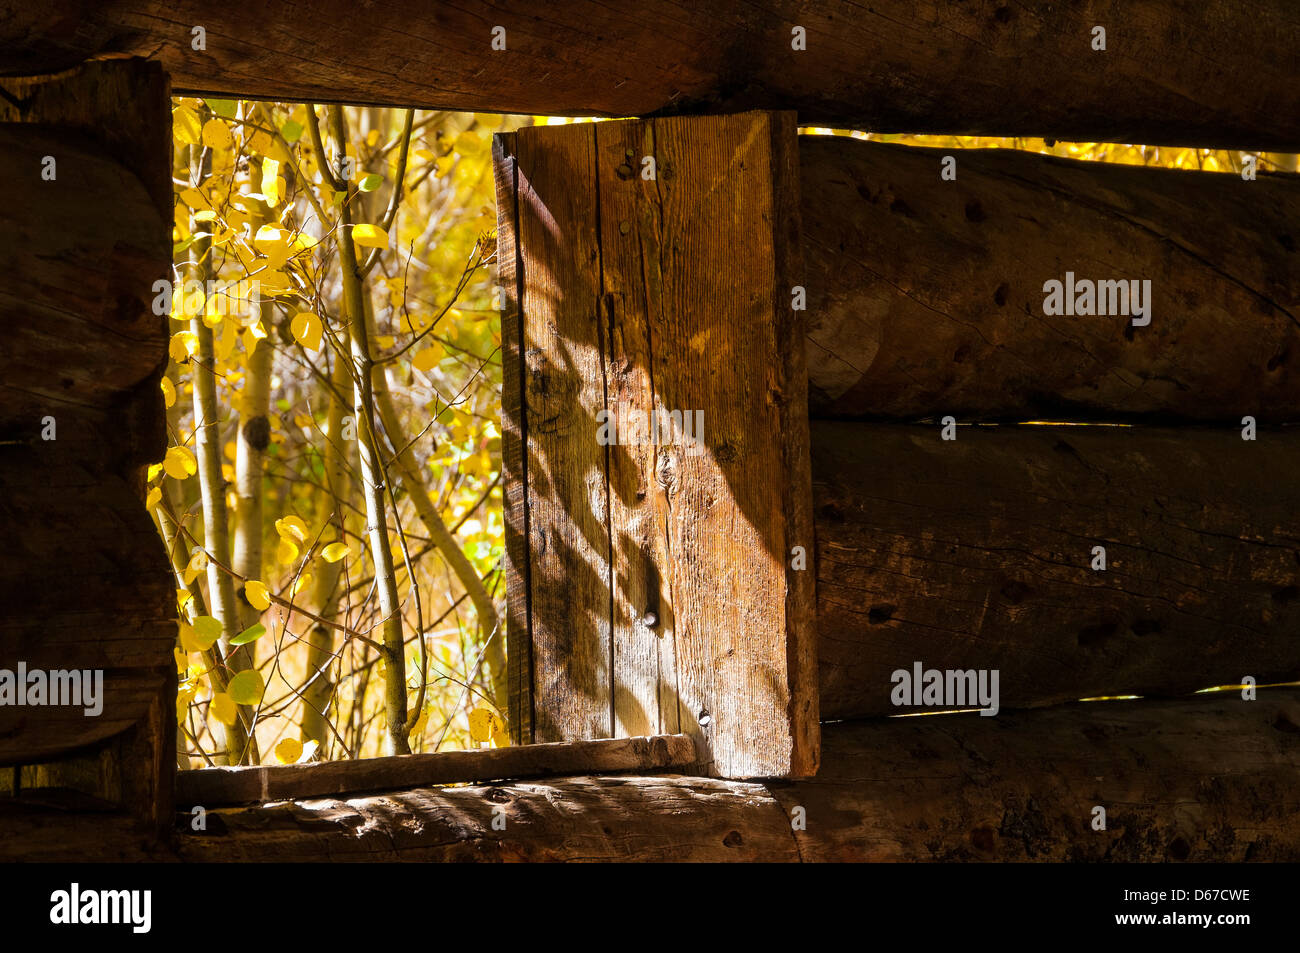 Autumn foliage seen through the window of a miner's cabin, Ashcroft ghost town, Pitkin County near Aspen, Colorado. Stock Photo